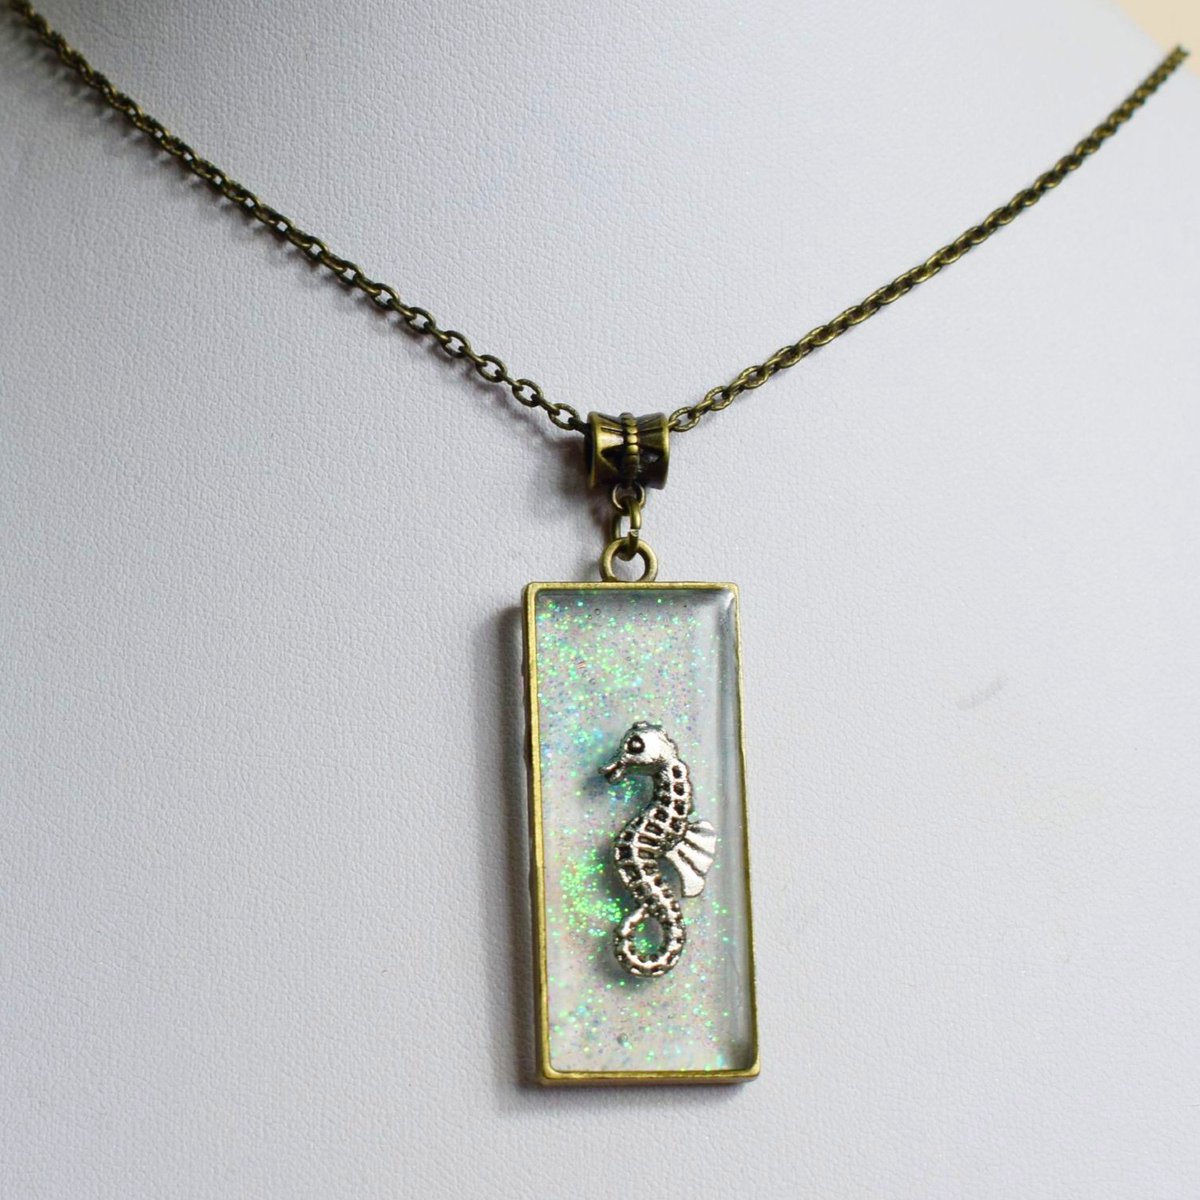 If the sun is making you think of days by the sea how about this lovely seahorse necklace to wear when you do go. Get 21% off with code 21AGAIN too! #seahorse #SummerVibes #folksyseller folksy.com/items/8273859-…